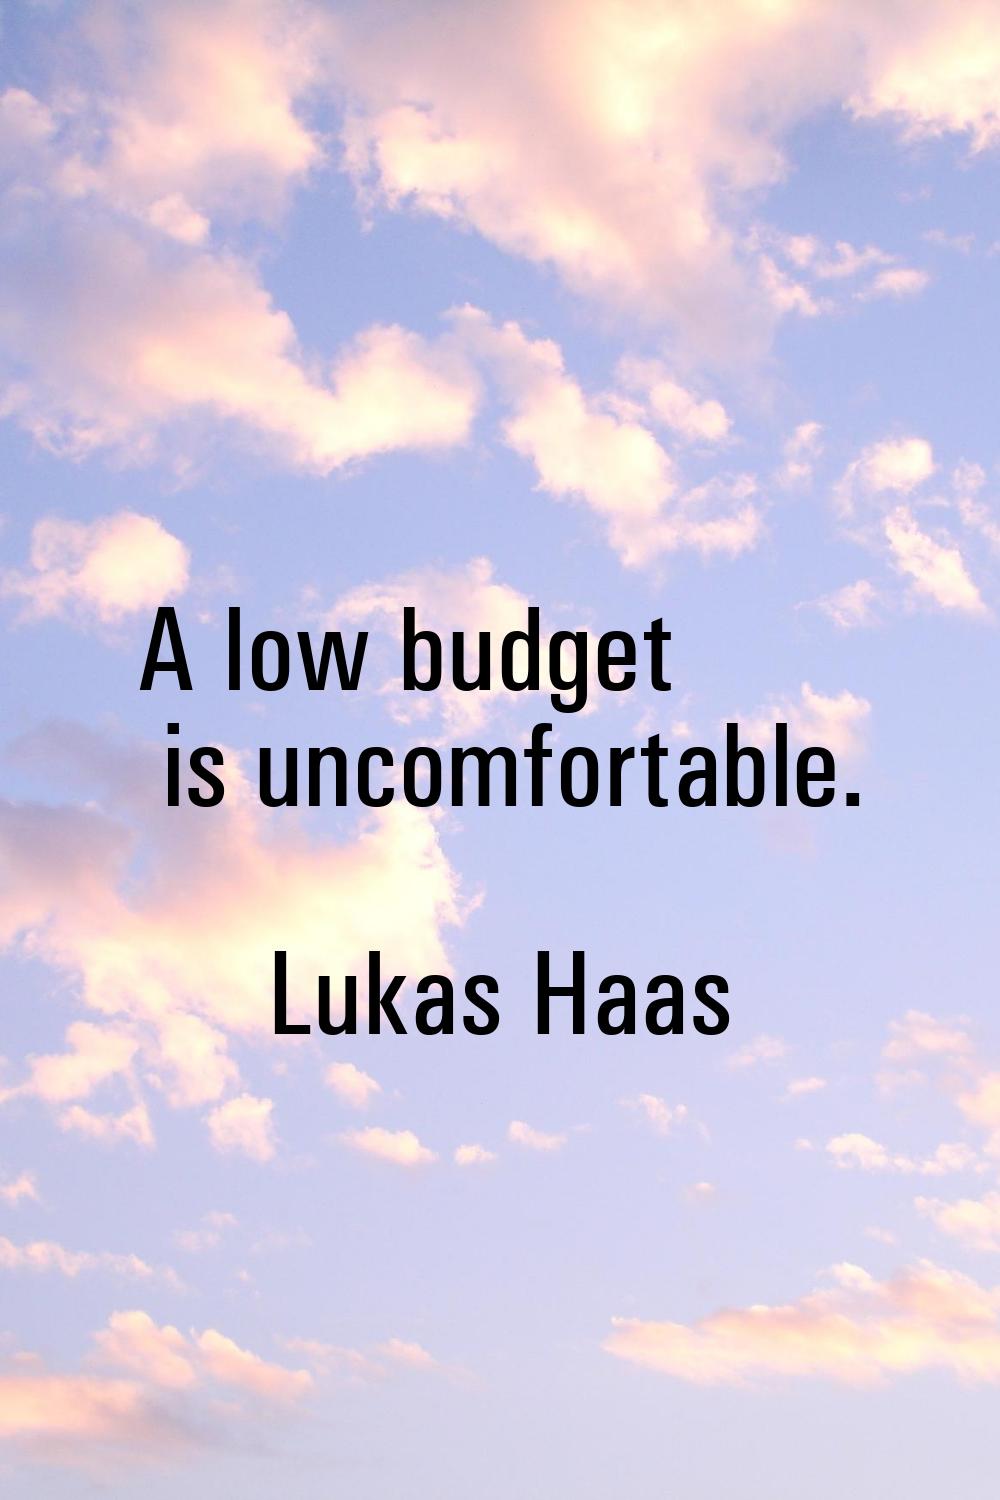 A low budget is uncomfortable.